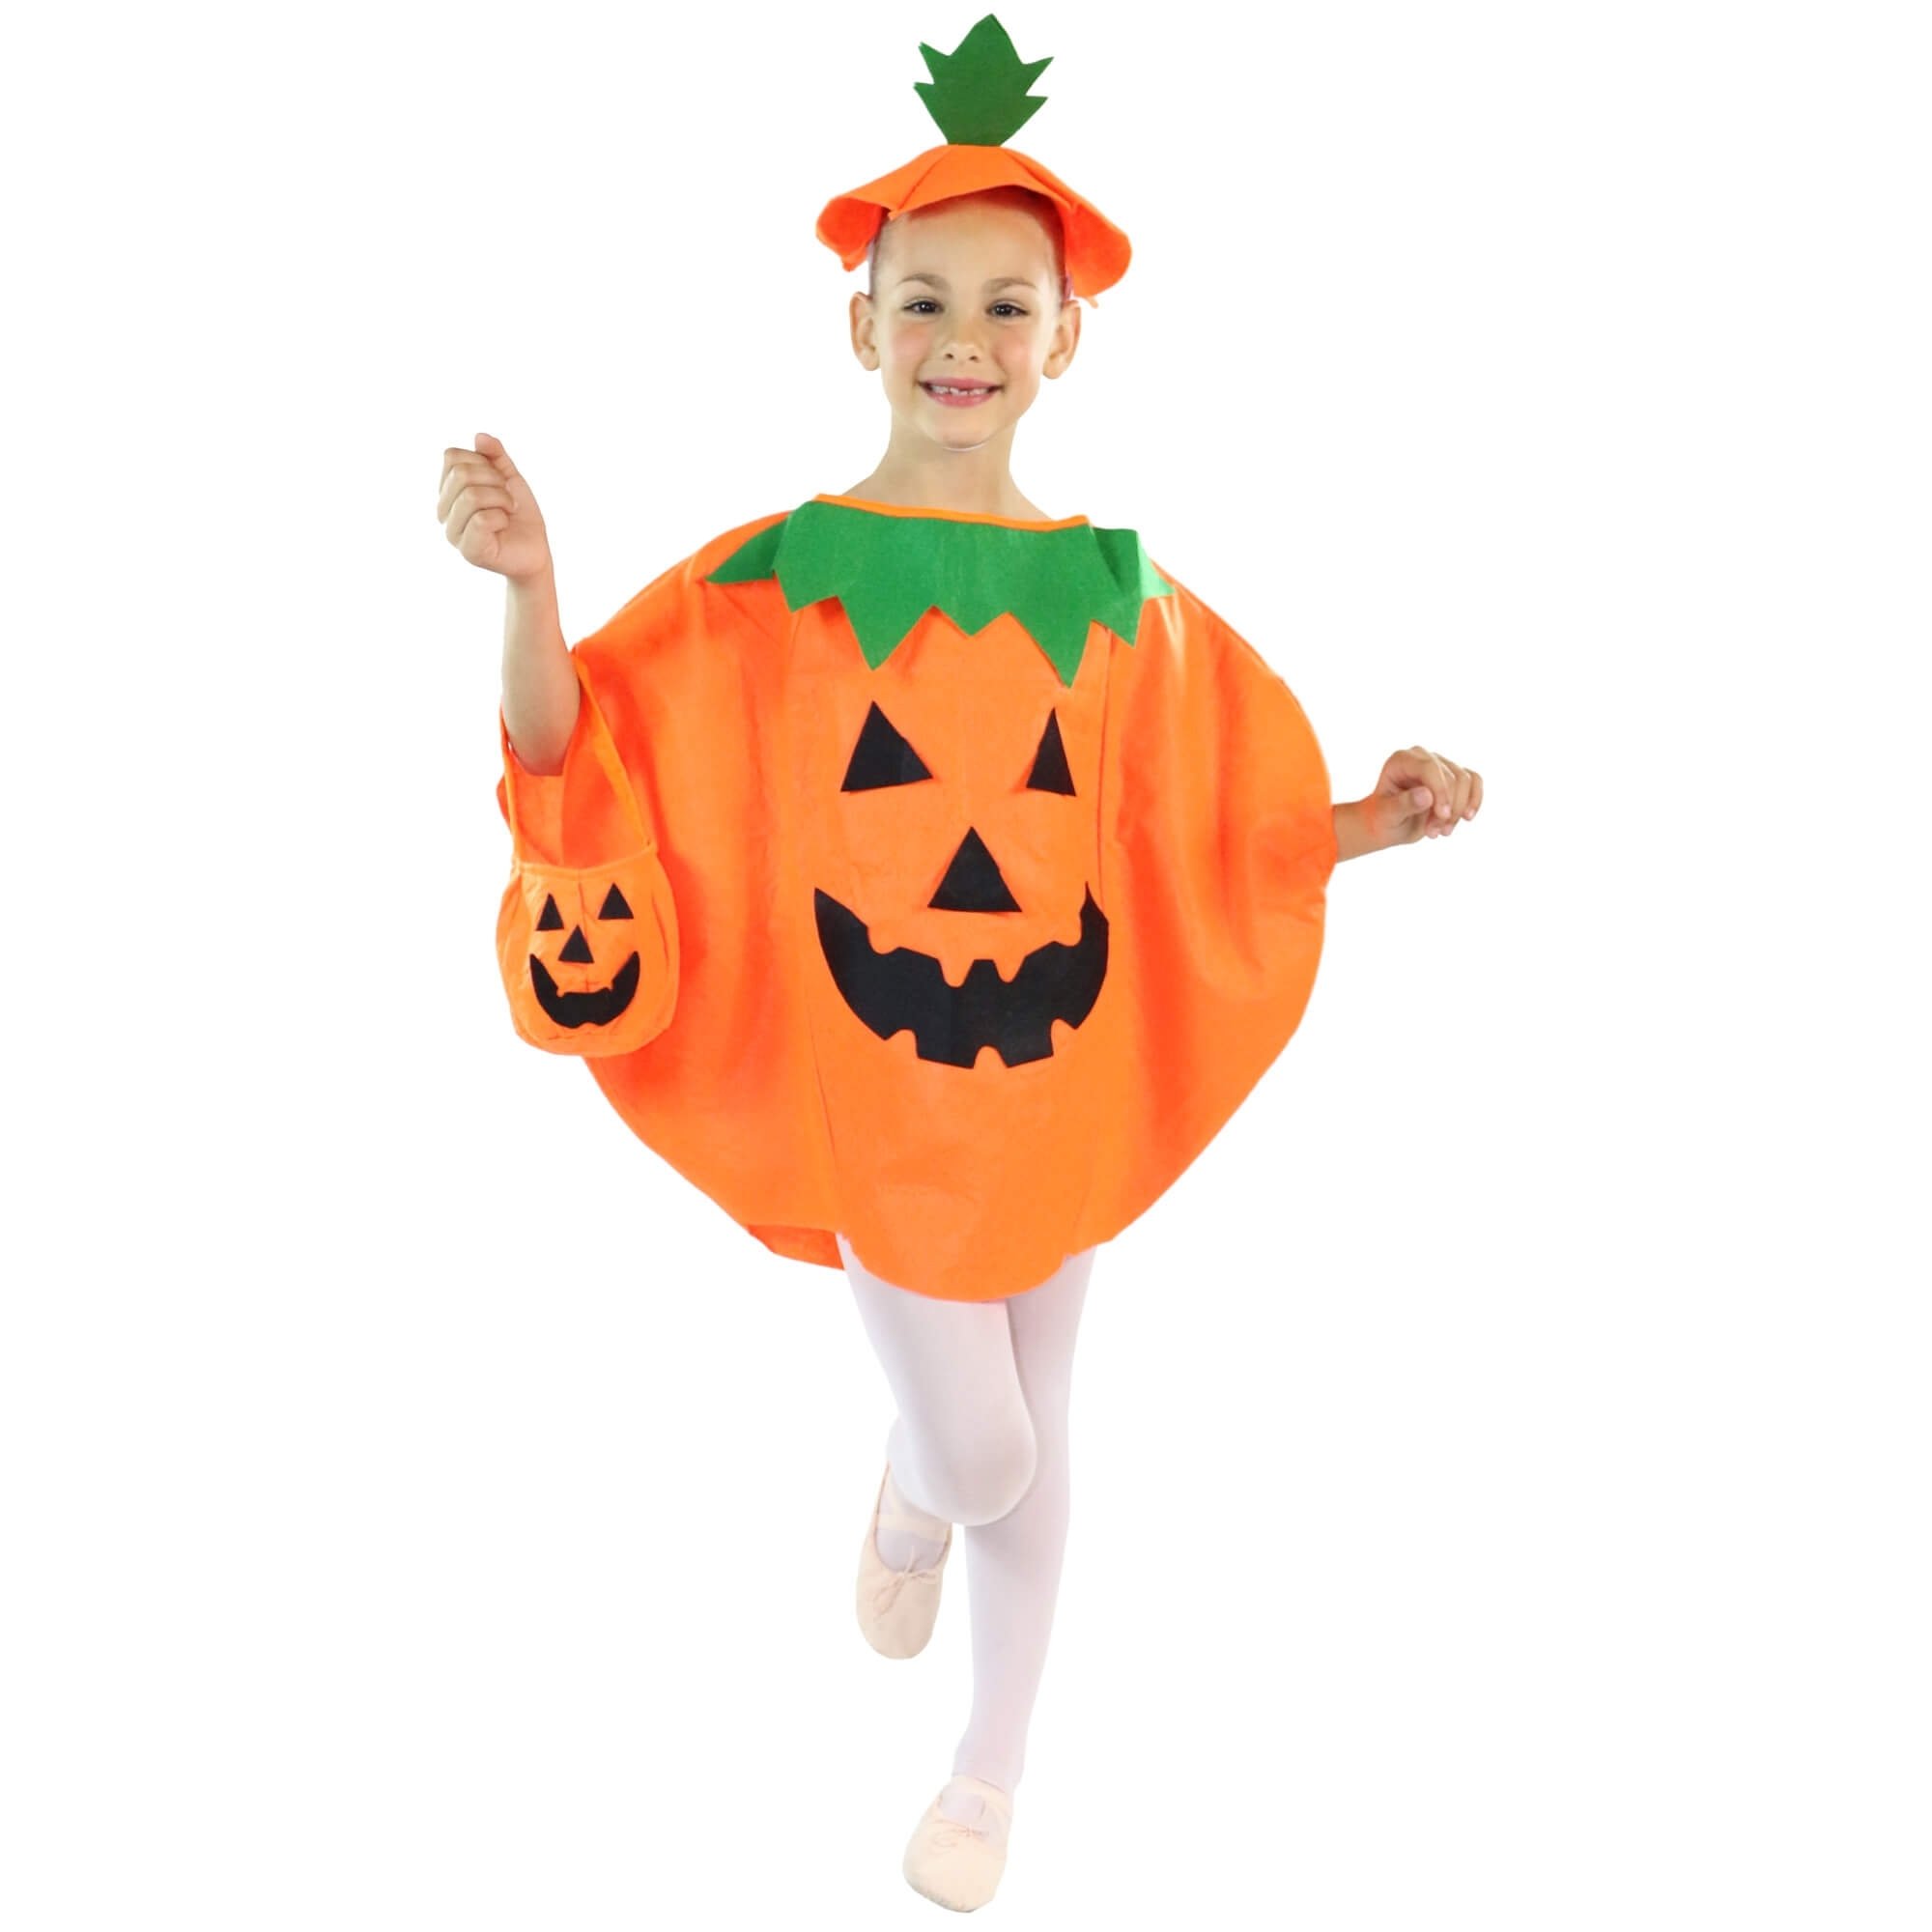 Danzcue Child Halloween Pumpkin Costume Suit with Hat and Pumpkin Bag - Click Image to Close